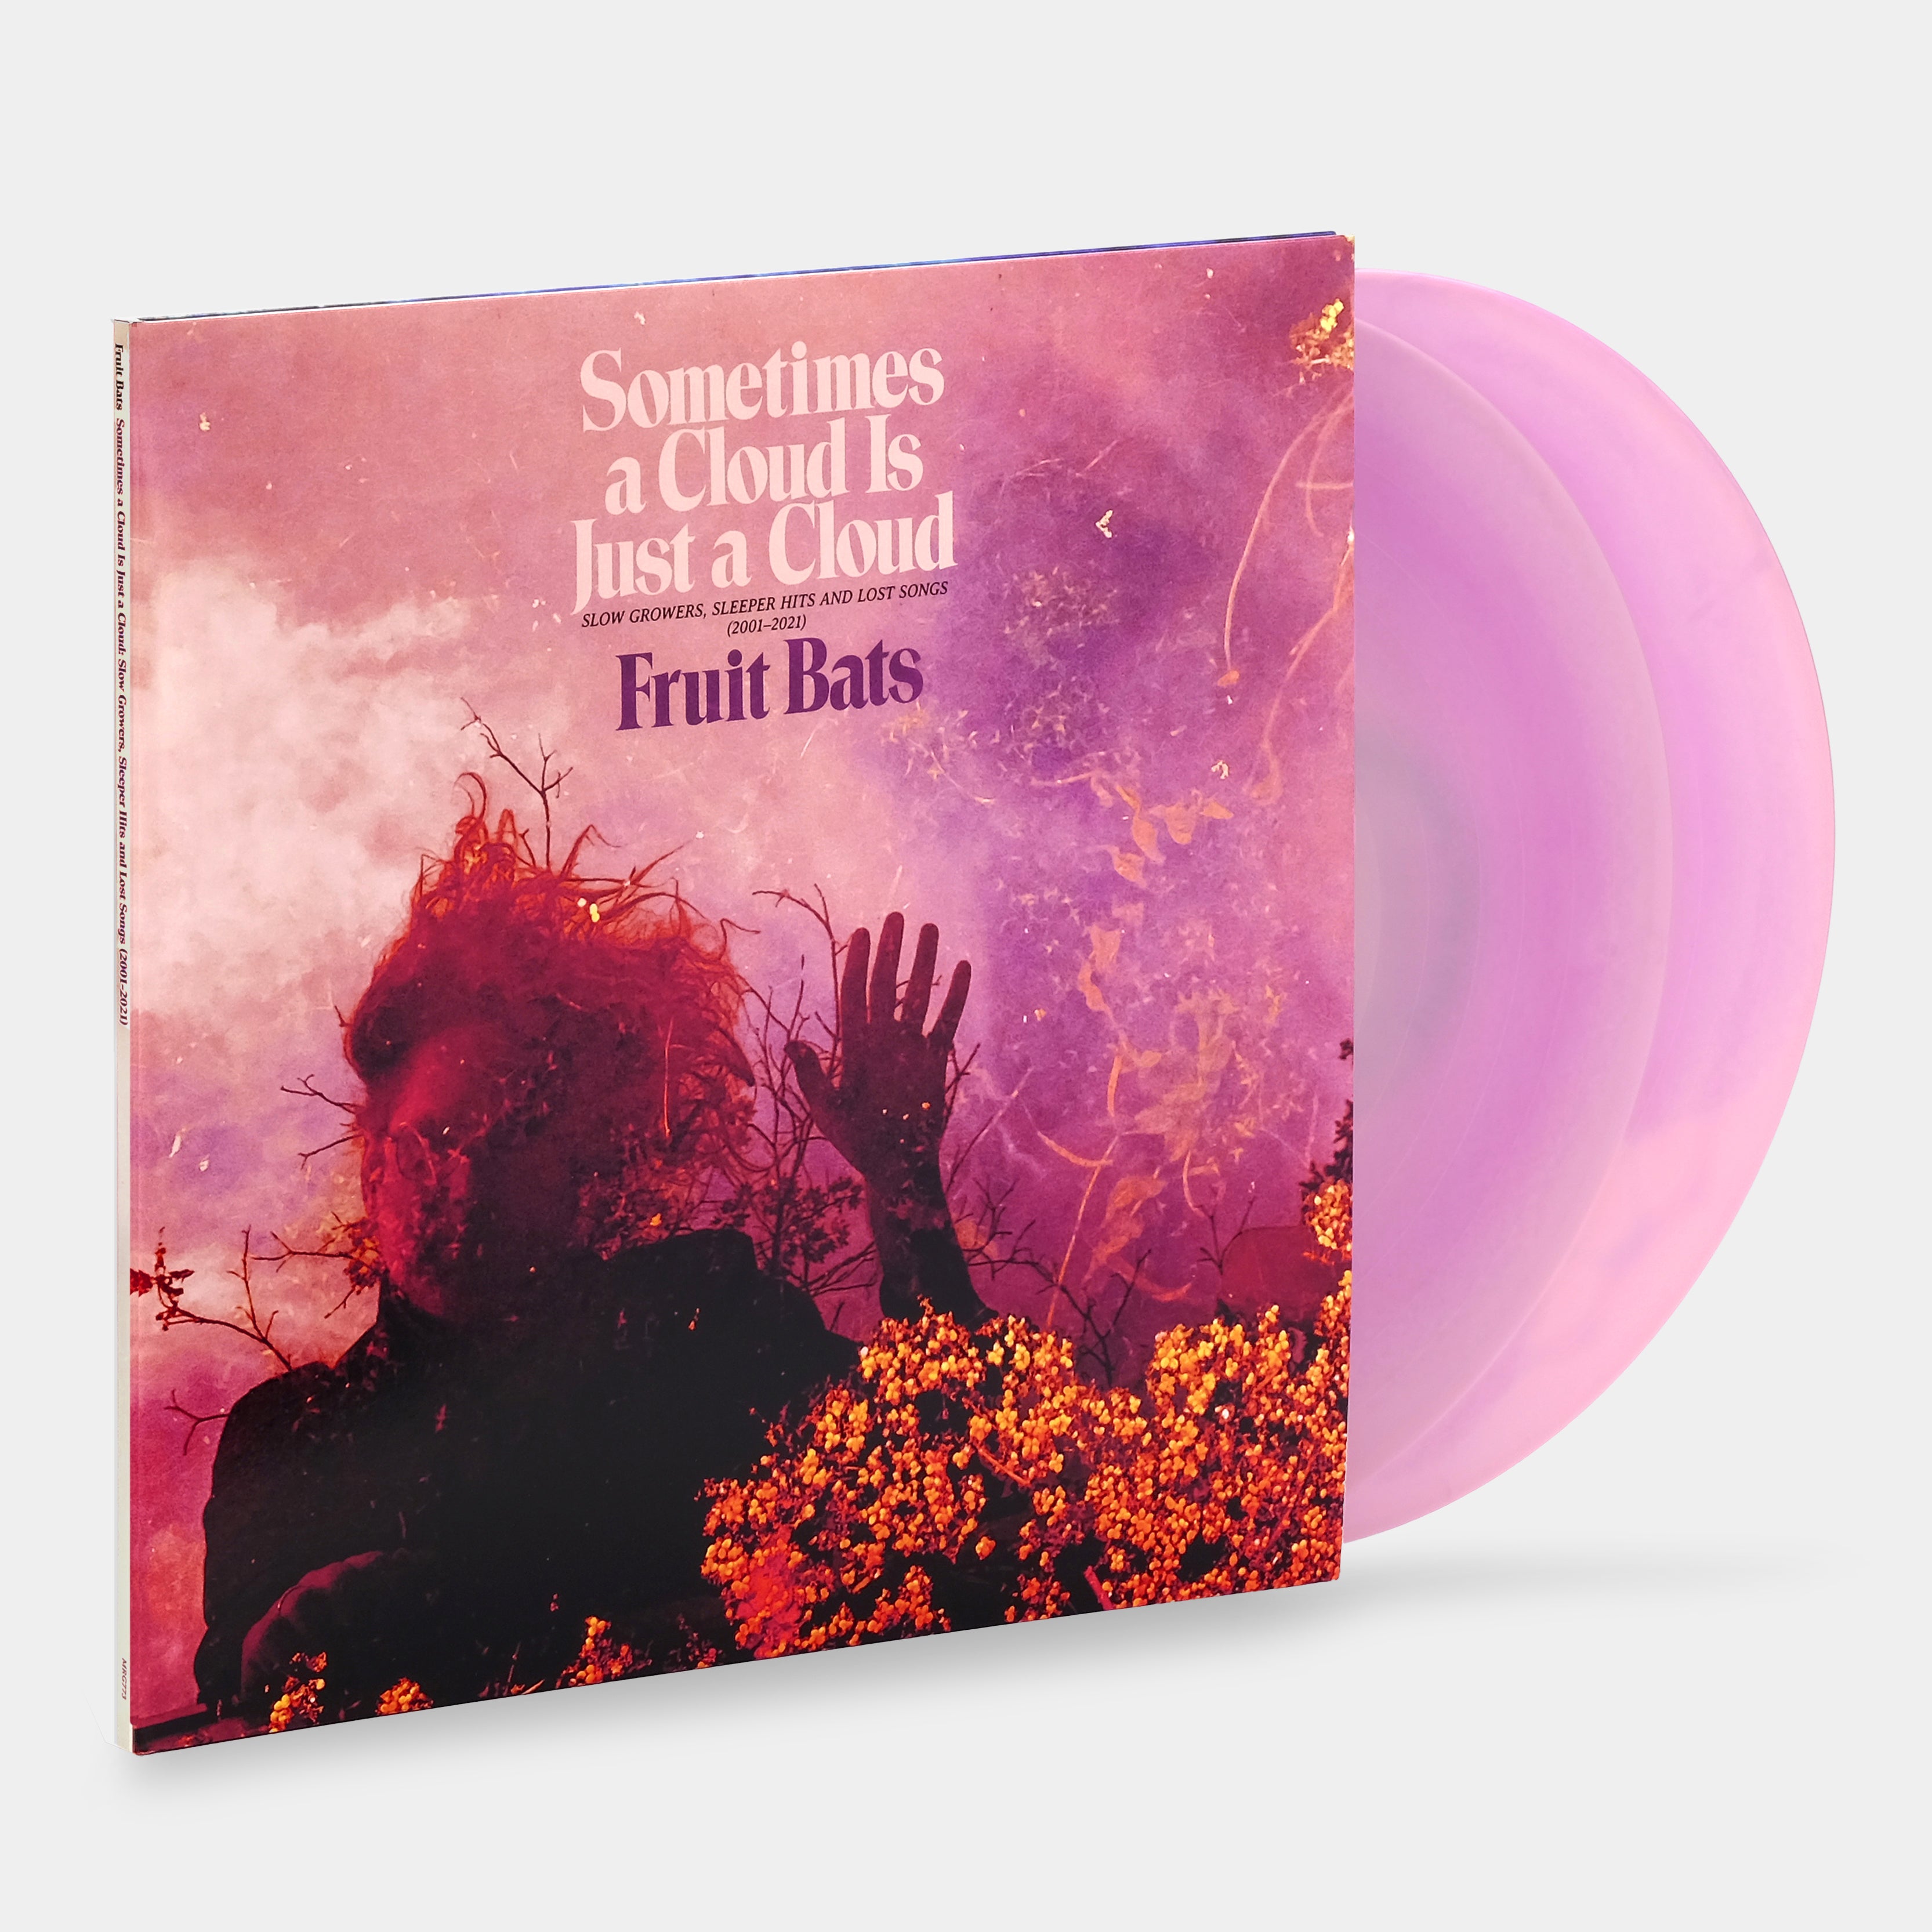 Fruit Bats - Sometimes a Cloud Is Just a Cloud: Slow Growers, Sleeper Hits, and Lost Songs (2001-2021) 2xLP Pink & Violet Swirl Vinyl Record